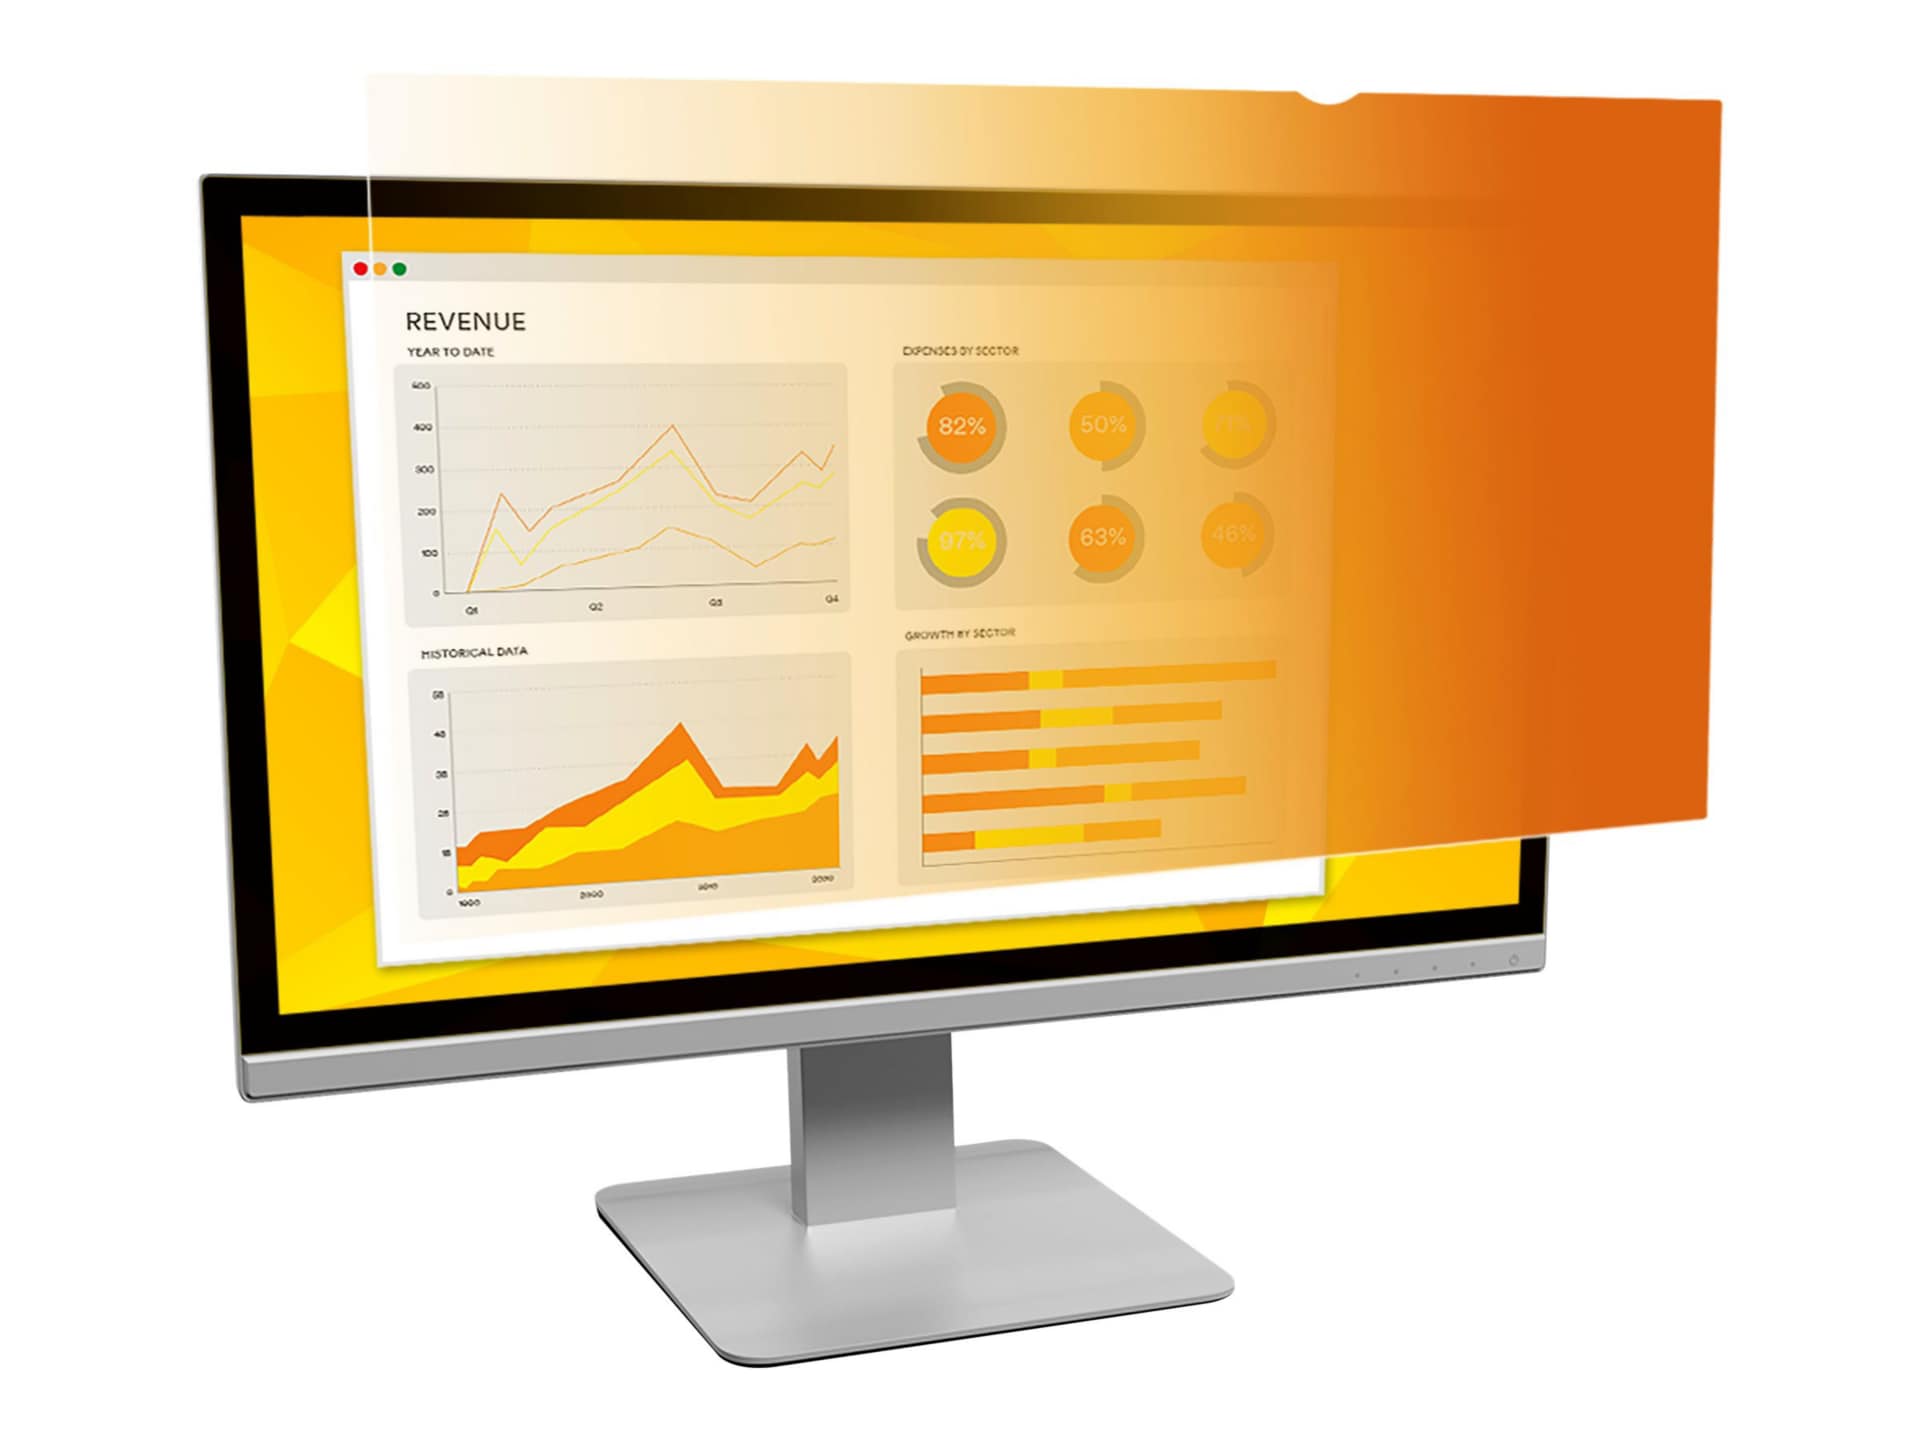 3M™ Gold Privacy Filter for 21.5" Widescreen Monitor